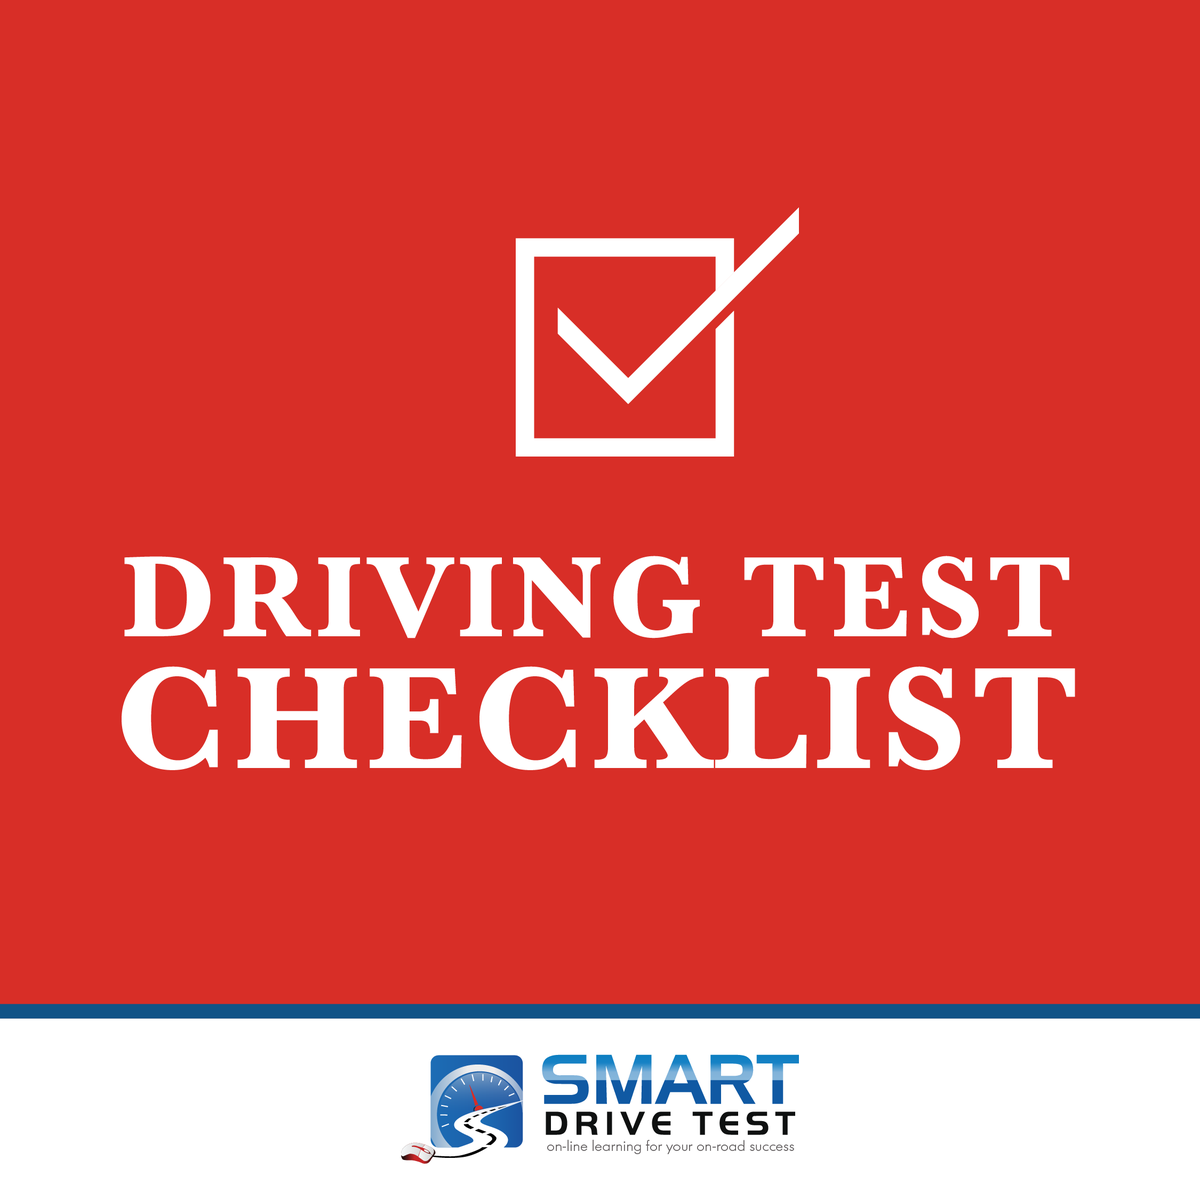 DRIVER'S TEST CHECKLIST CLICK to get all the information you need to pass your driver's test the first time! Get your DON'T FAIL Your Driver's Test checklist here: smartdrivetest.com/pass-drivers-t… #drivingtestpassed #drivingtest #drivingtestsuccess #drivingschool #drivingperformance